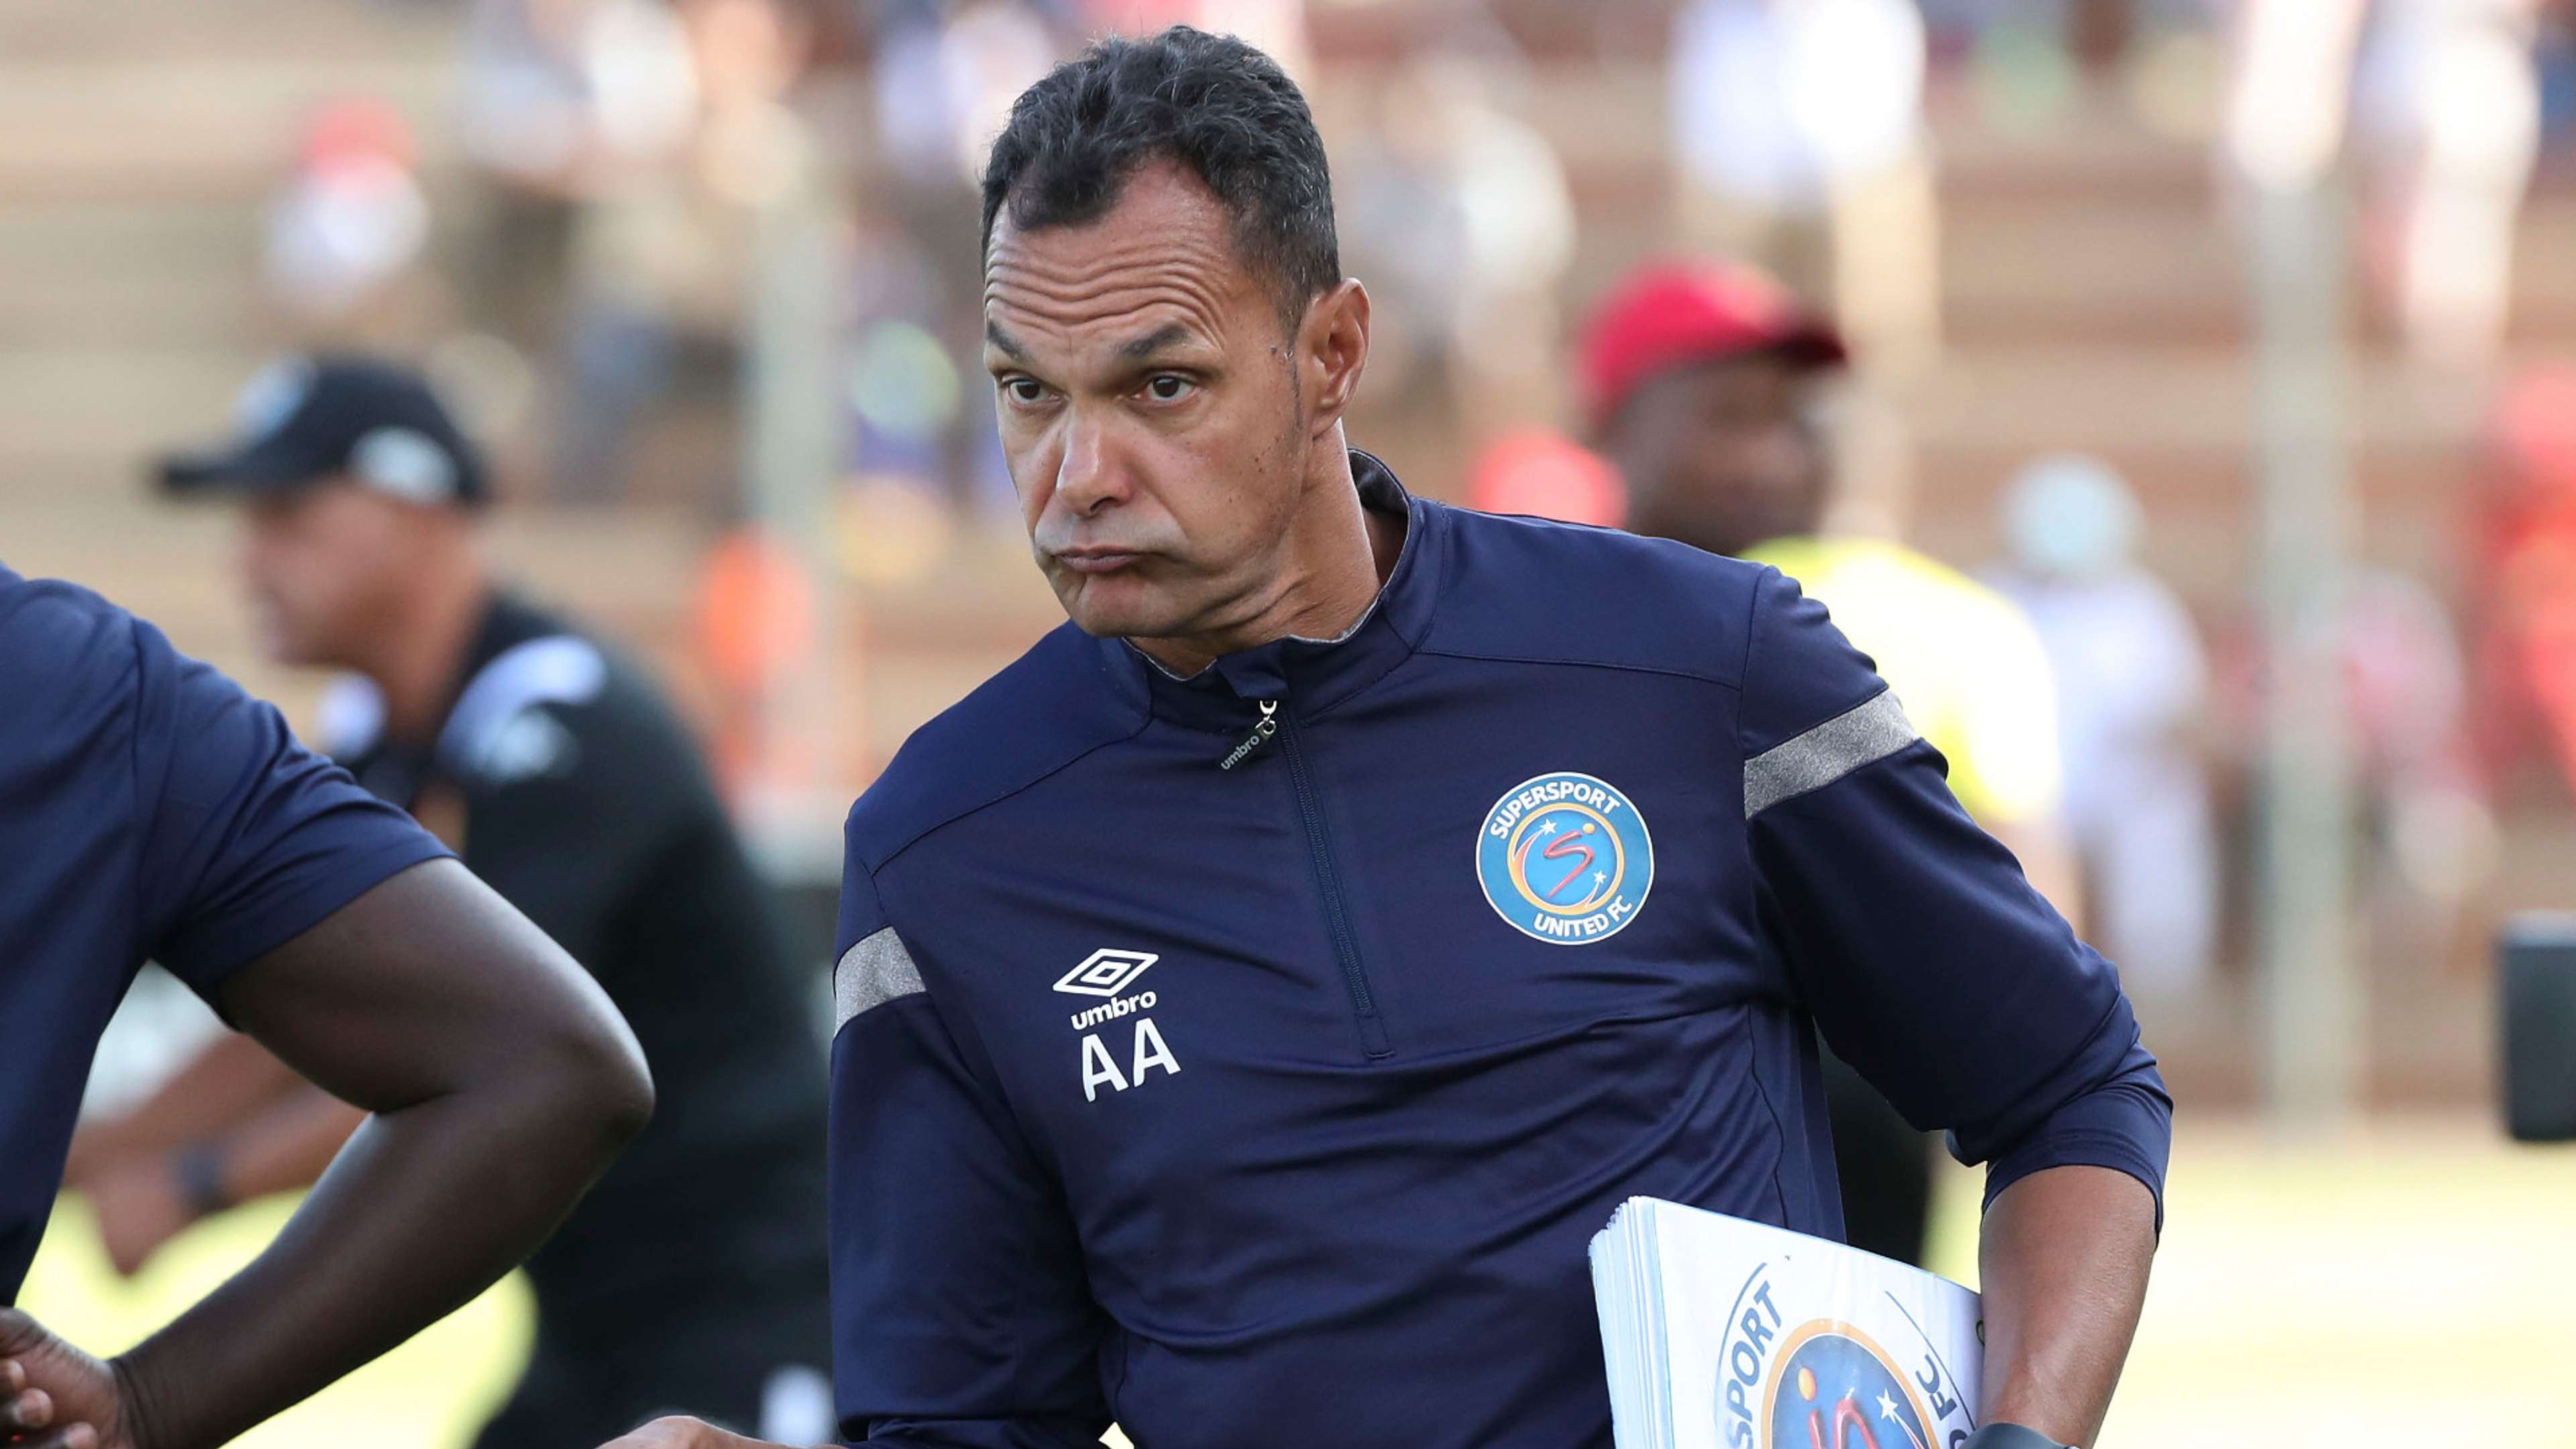 Andre Arendse, assistant coach of SuperSport United, March 2020